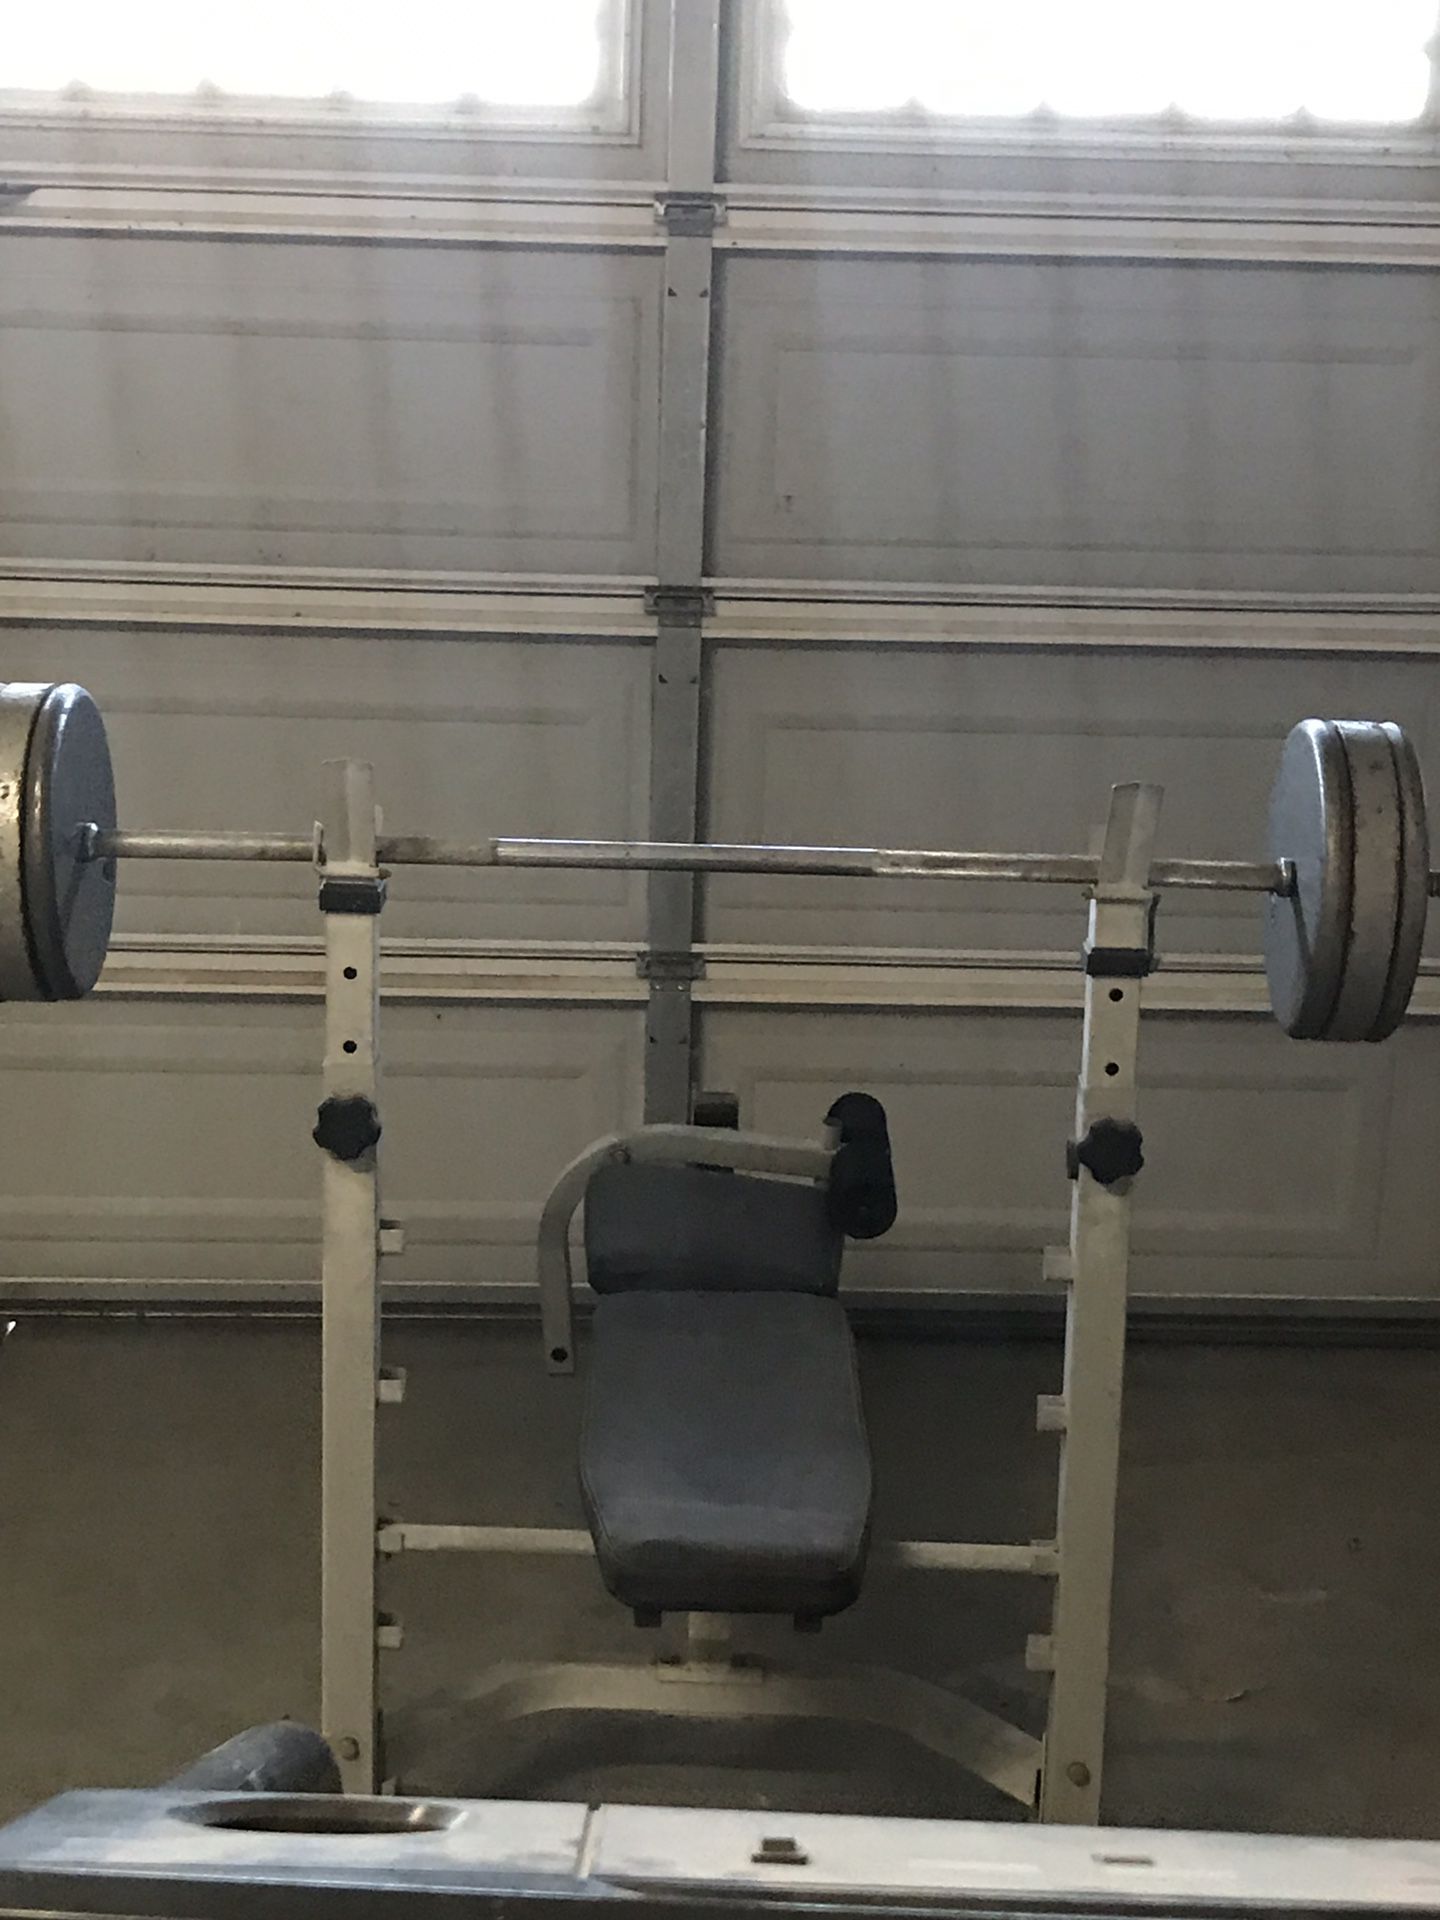 Weights, bench, bar, and over 350 pounds of iron plates. Different size plates from 25 pound to 8.5 pound plates